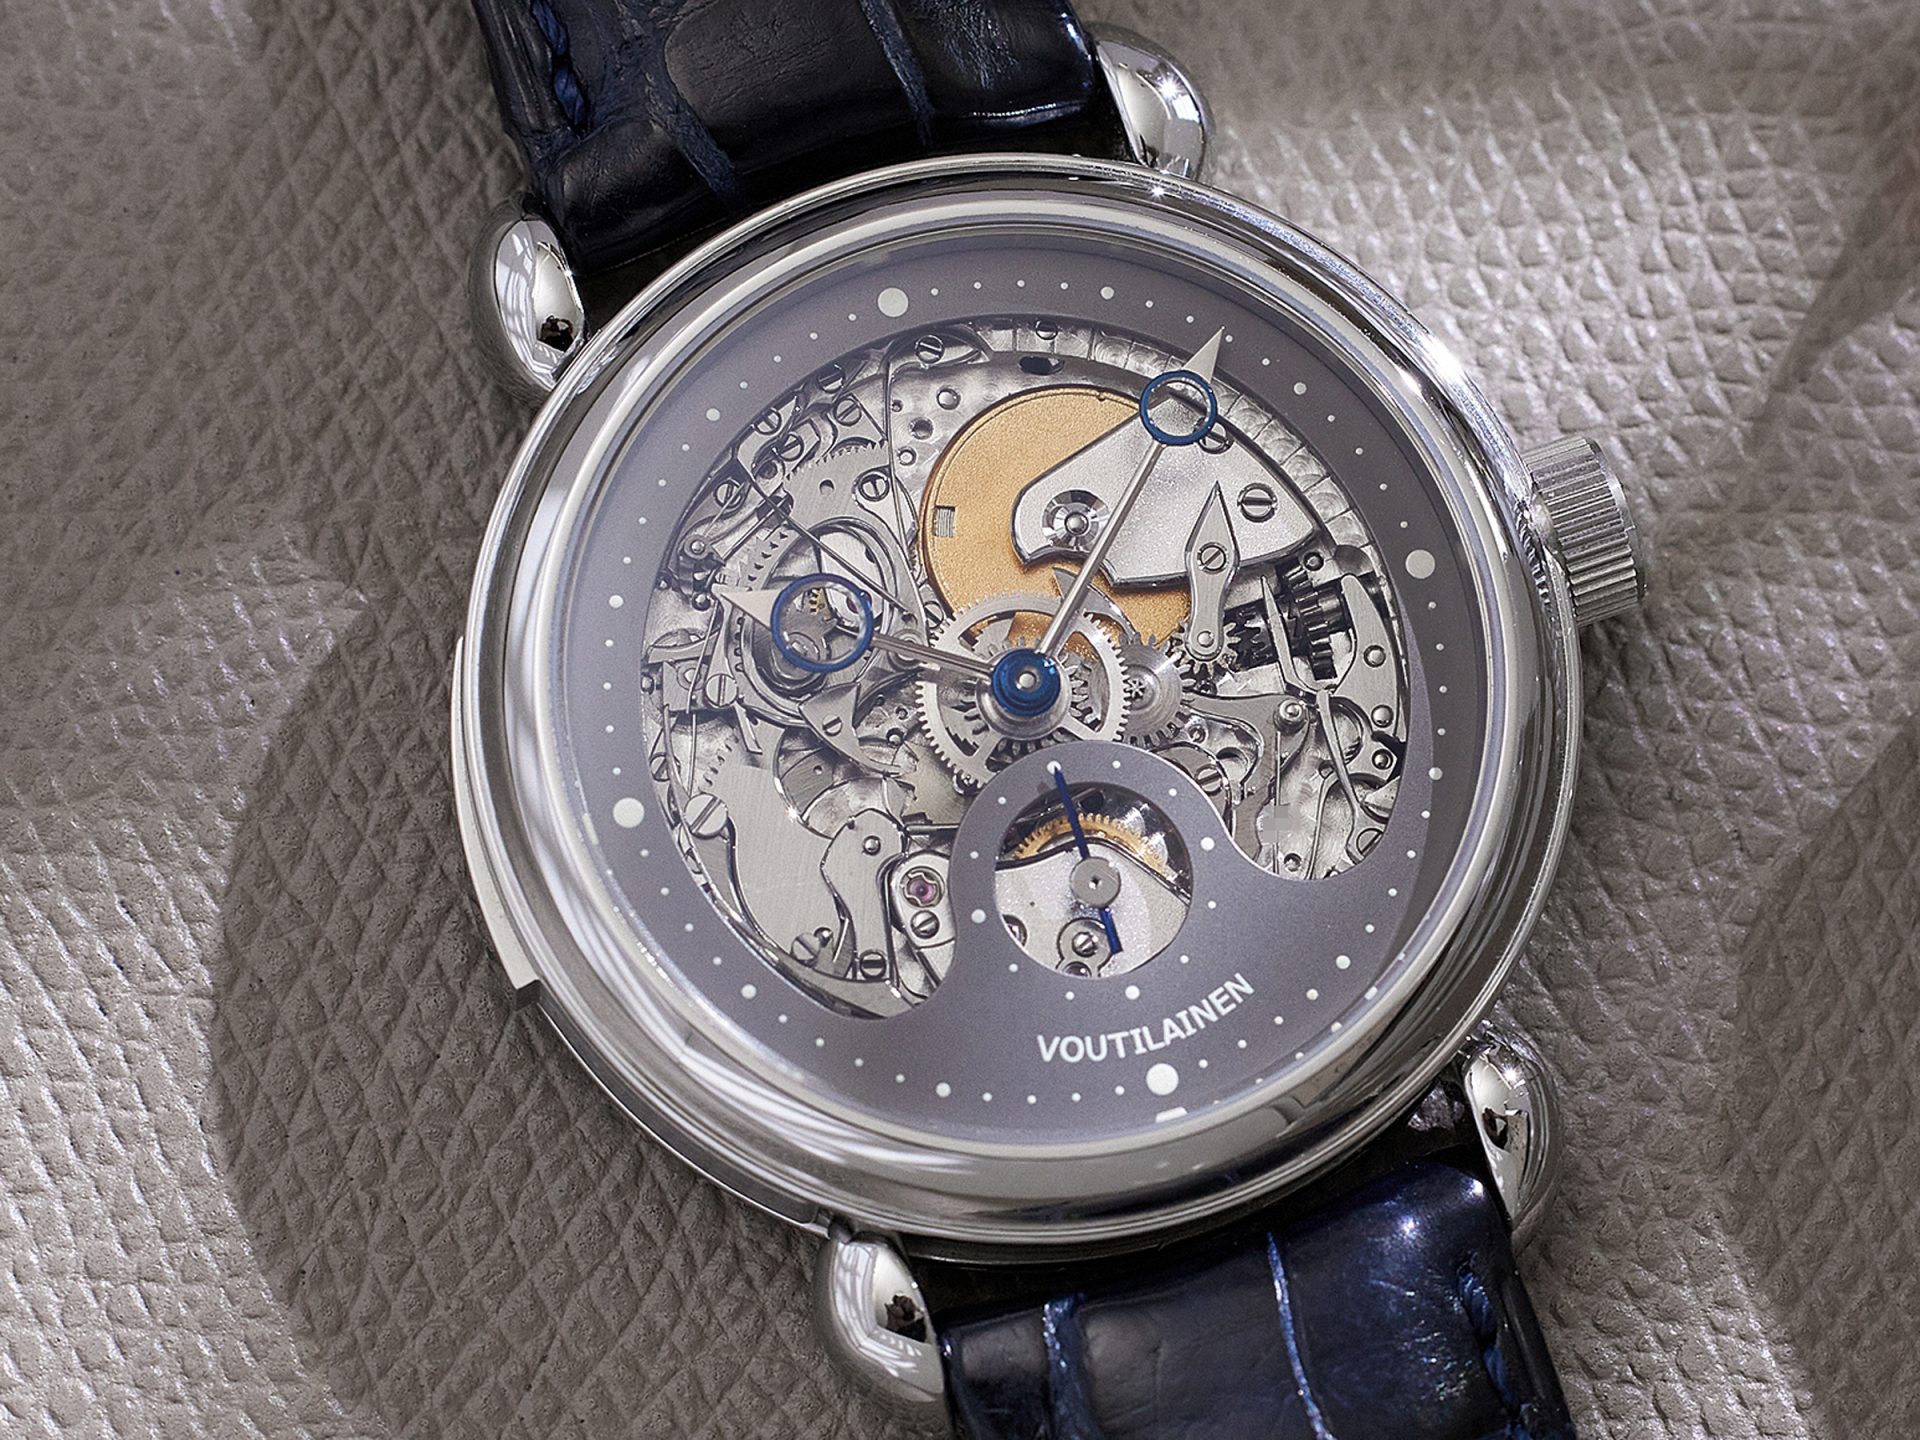 Voutilainen minute repeater 10 a collected man11